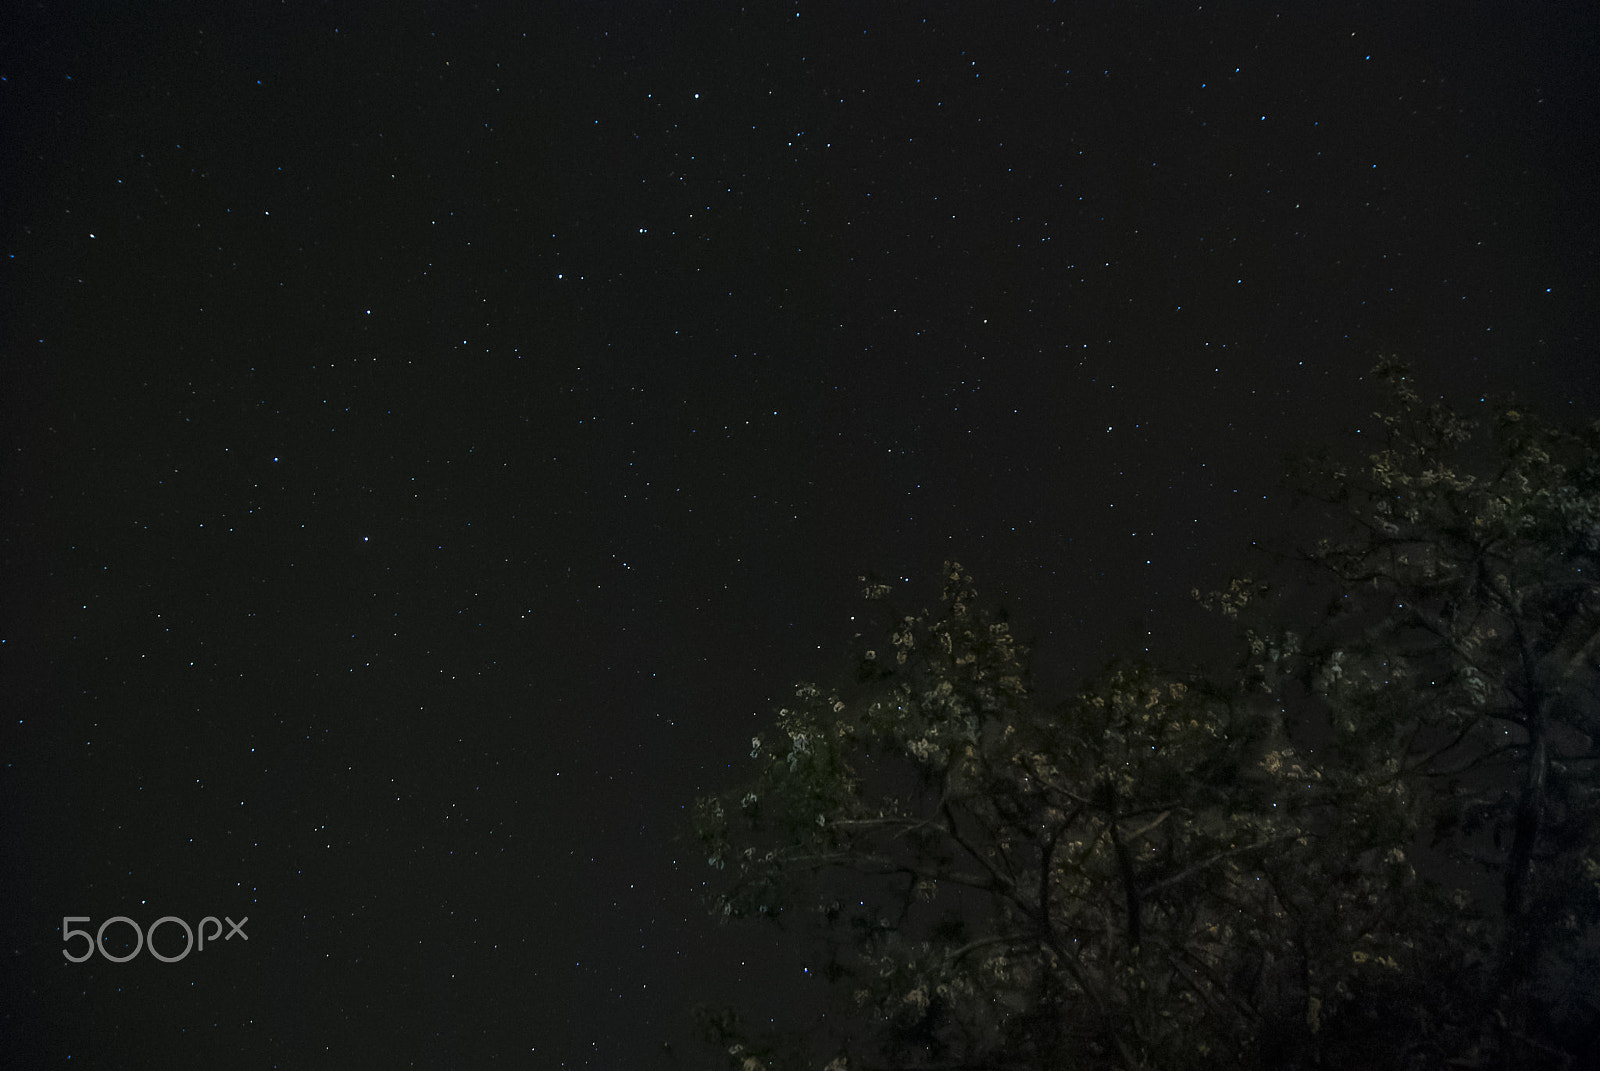 Nikon D80 + Tamron SP AF 17-50mm F2.8 XR Di II VC LD Aspherical (IF) sample photo. Stars and night landscape photography